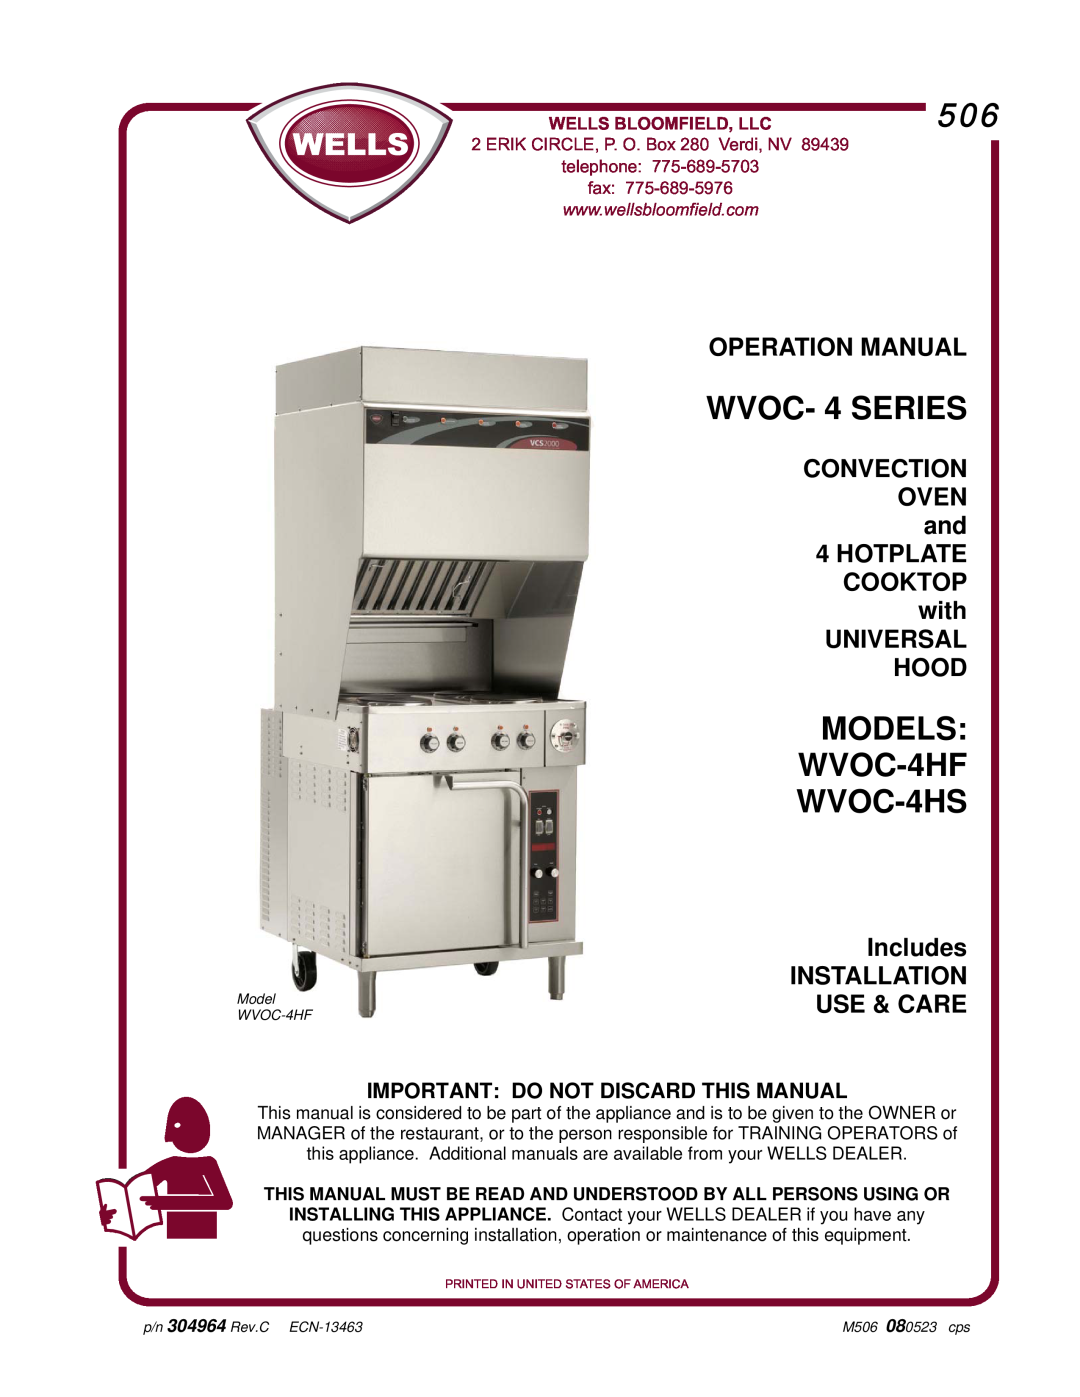 Wells WVOC-4HS operation manual CONVECTION OVEN and, Universal Hood, Includes INSTALLATION USE & CARE, WVOC- 4 SERIES, fax 